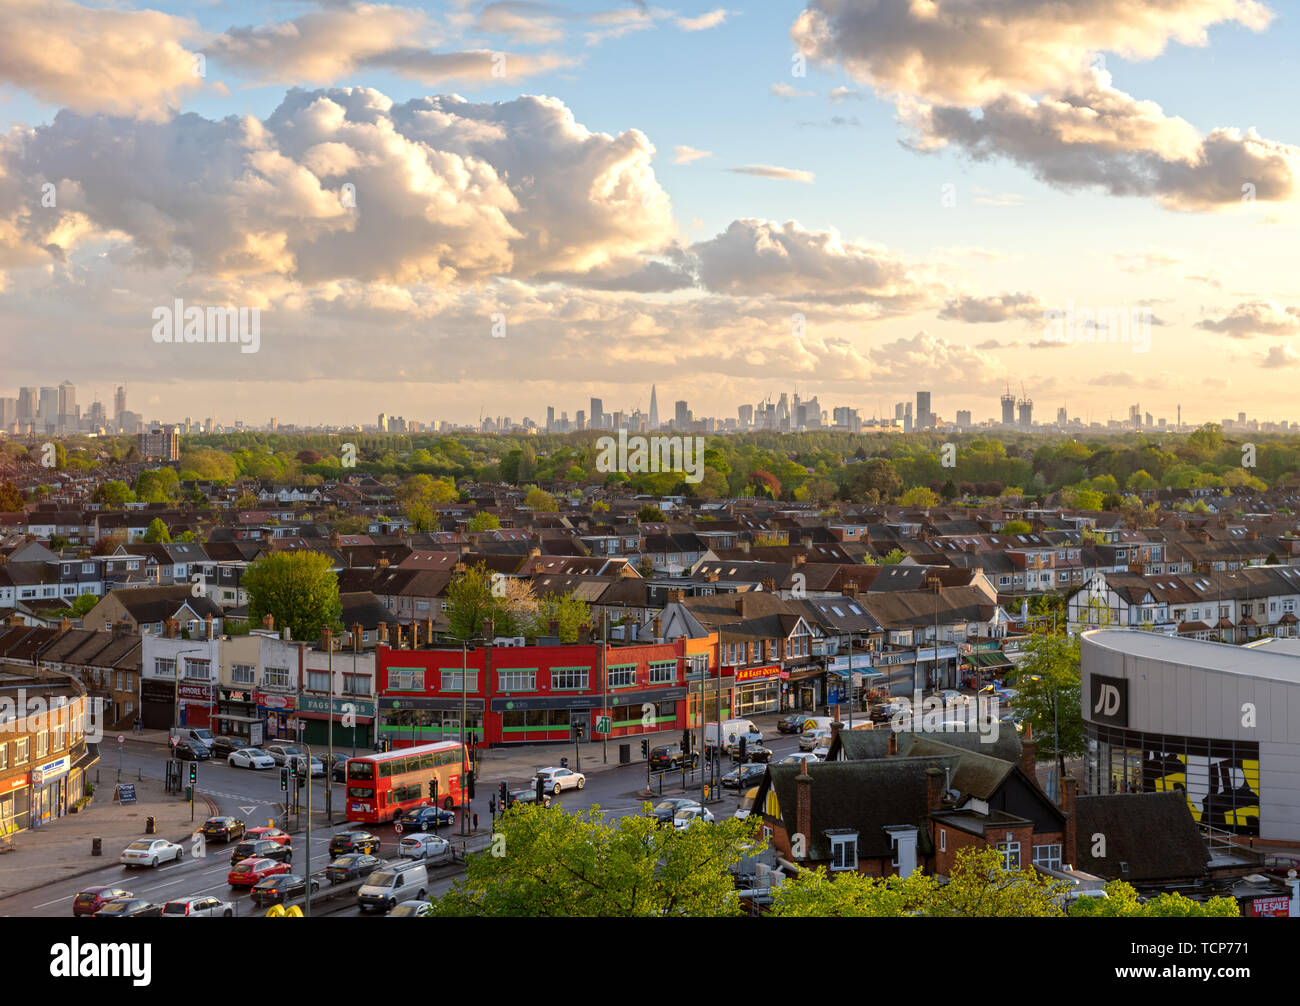 From the small town of Ilford overlooking the British capital London metropolitan area. Stock Photo